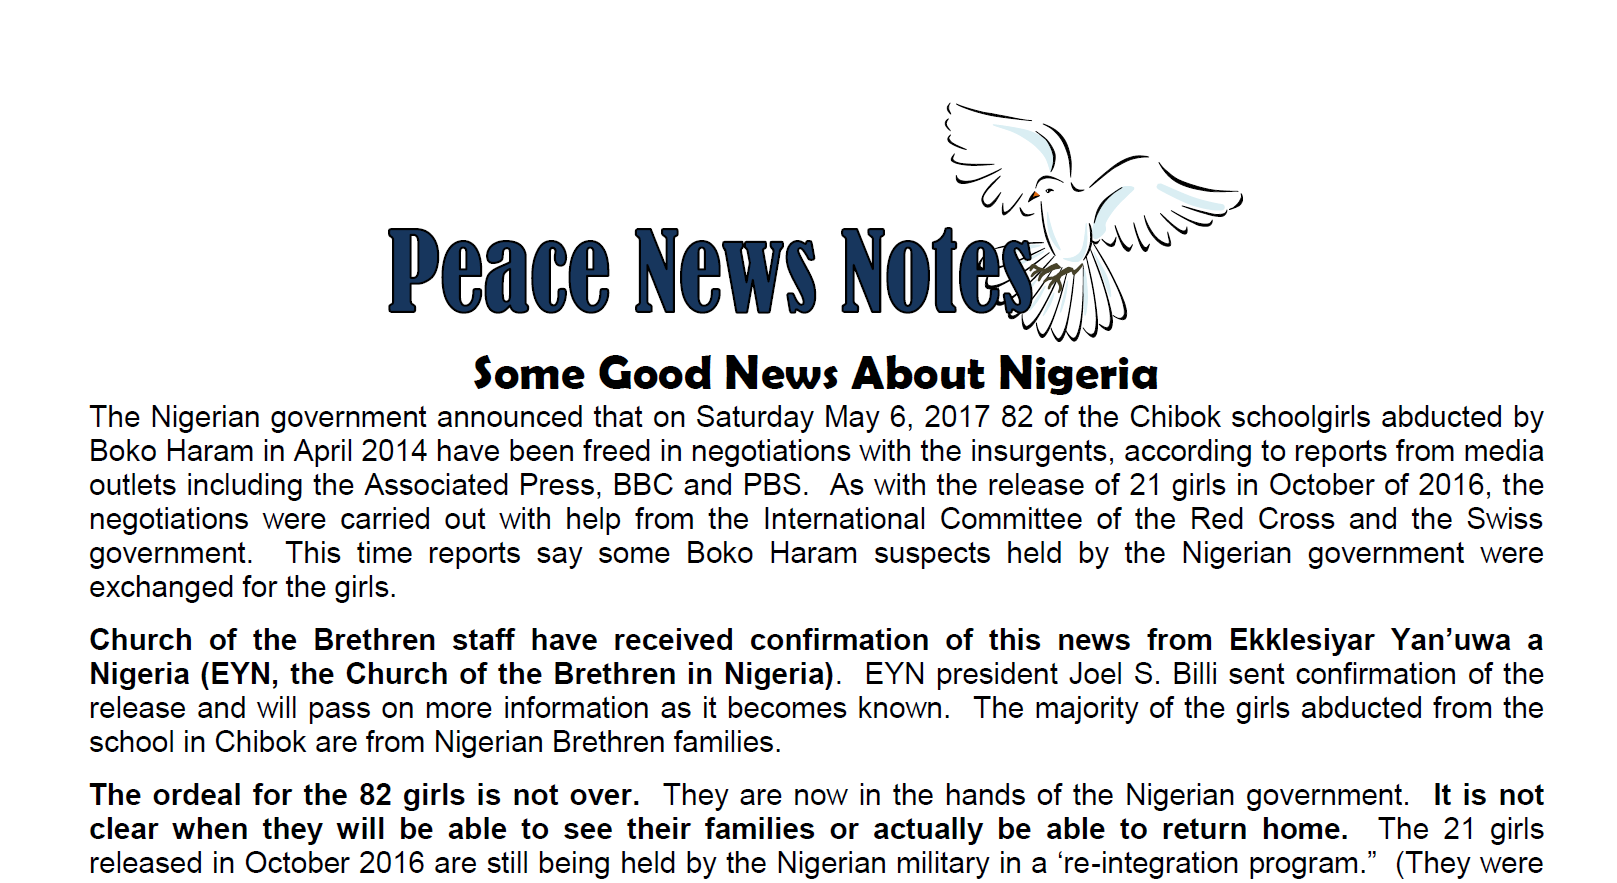 Some Good News from Nigeria